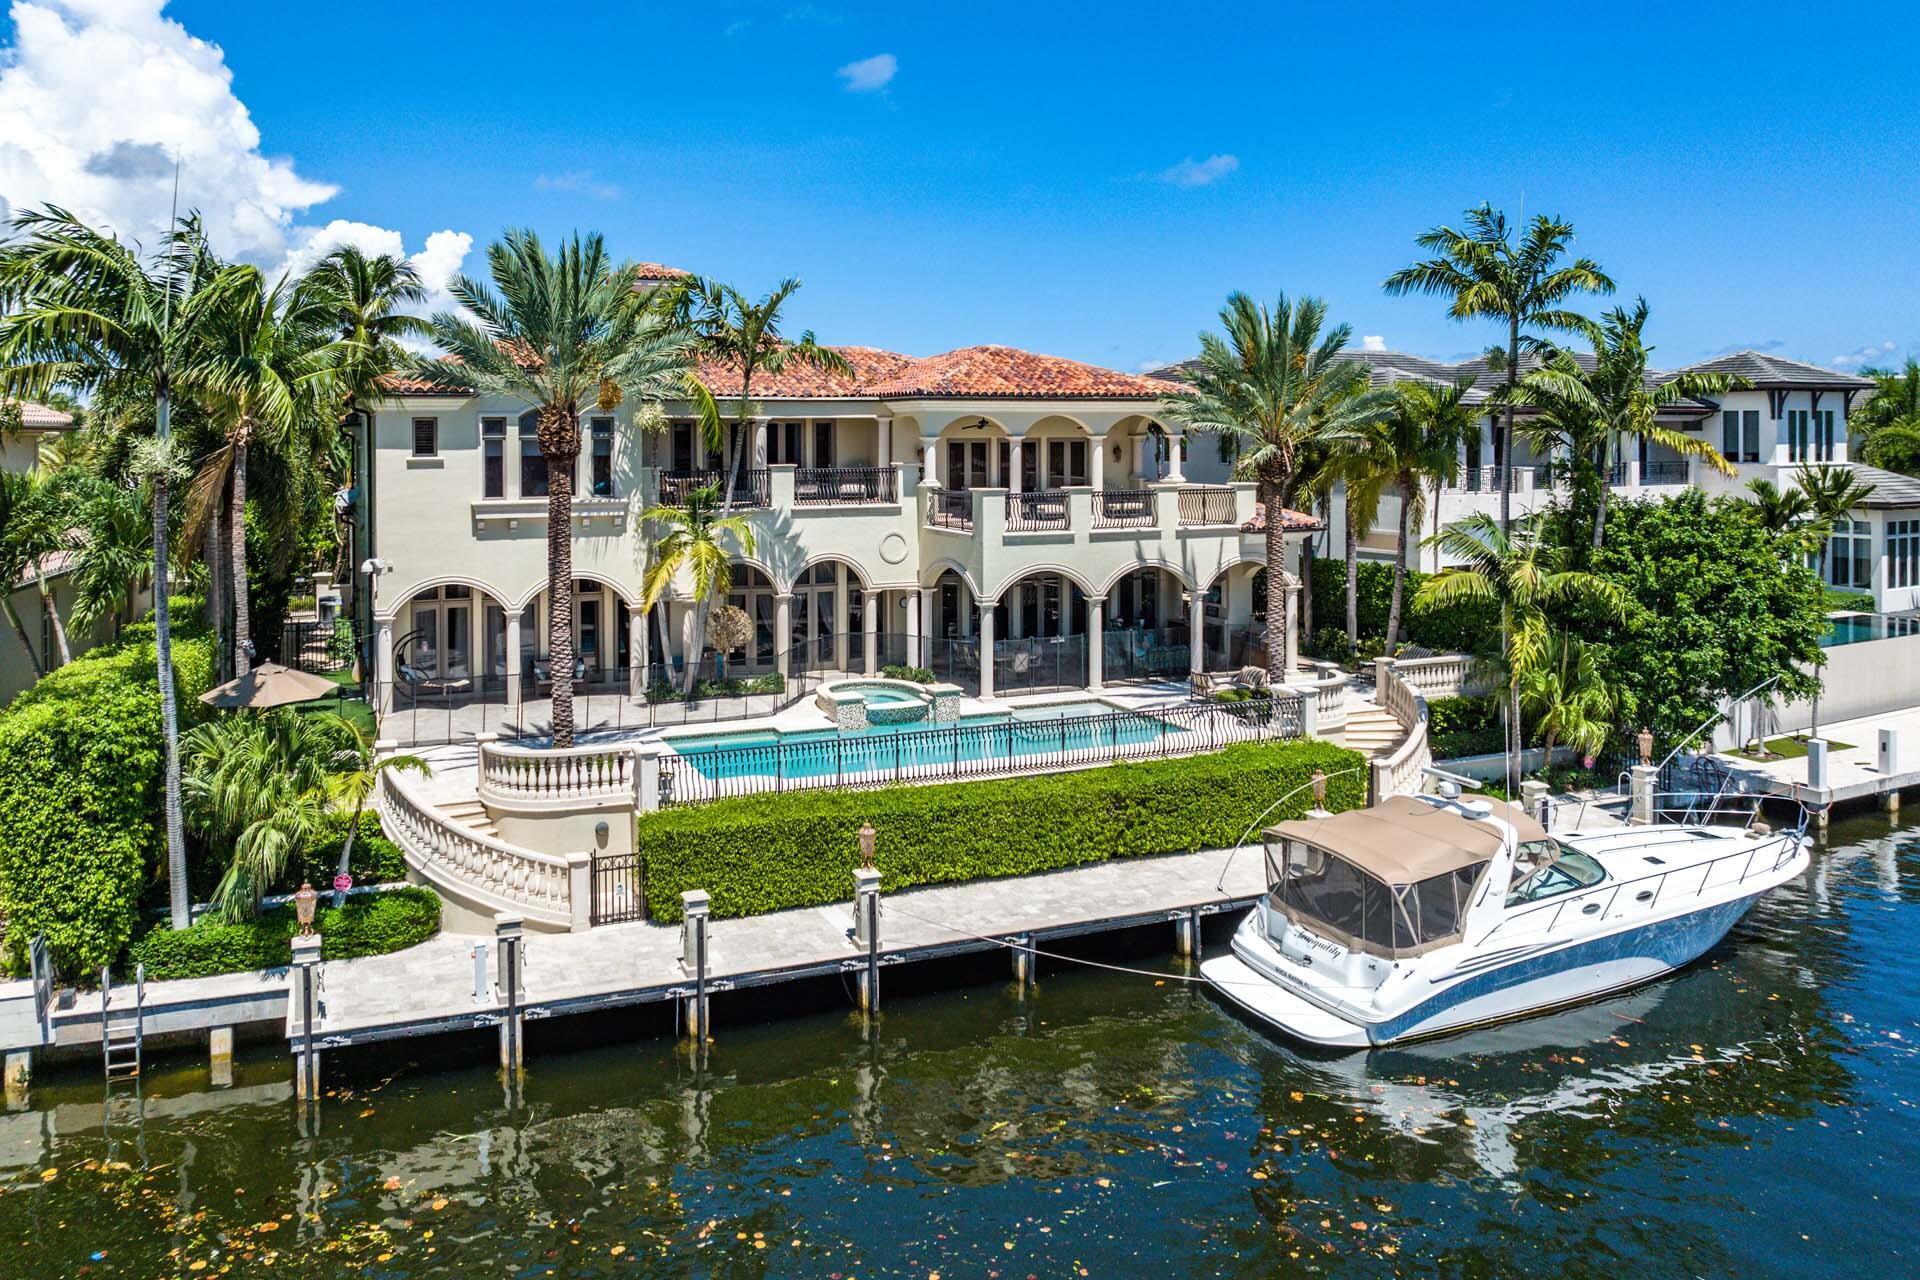 Property for Sale at 264 S Maya Palm Drive, Boca Raton, Palm Beach County, Florida - Bedrooms: 5 
Bathrooms: 6.5  - $13,000,000